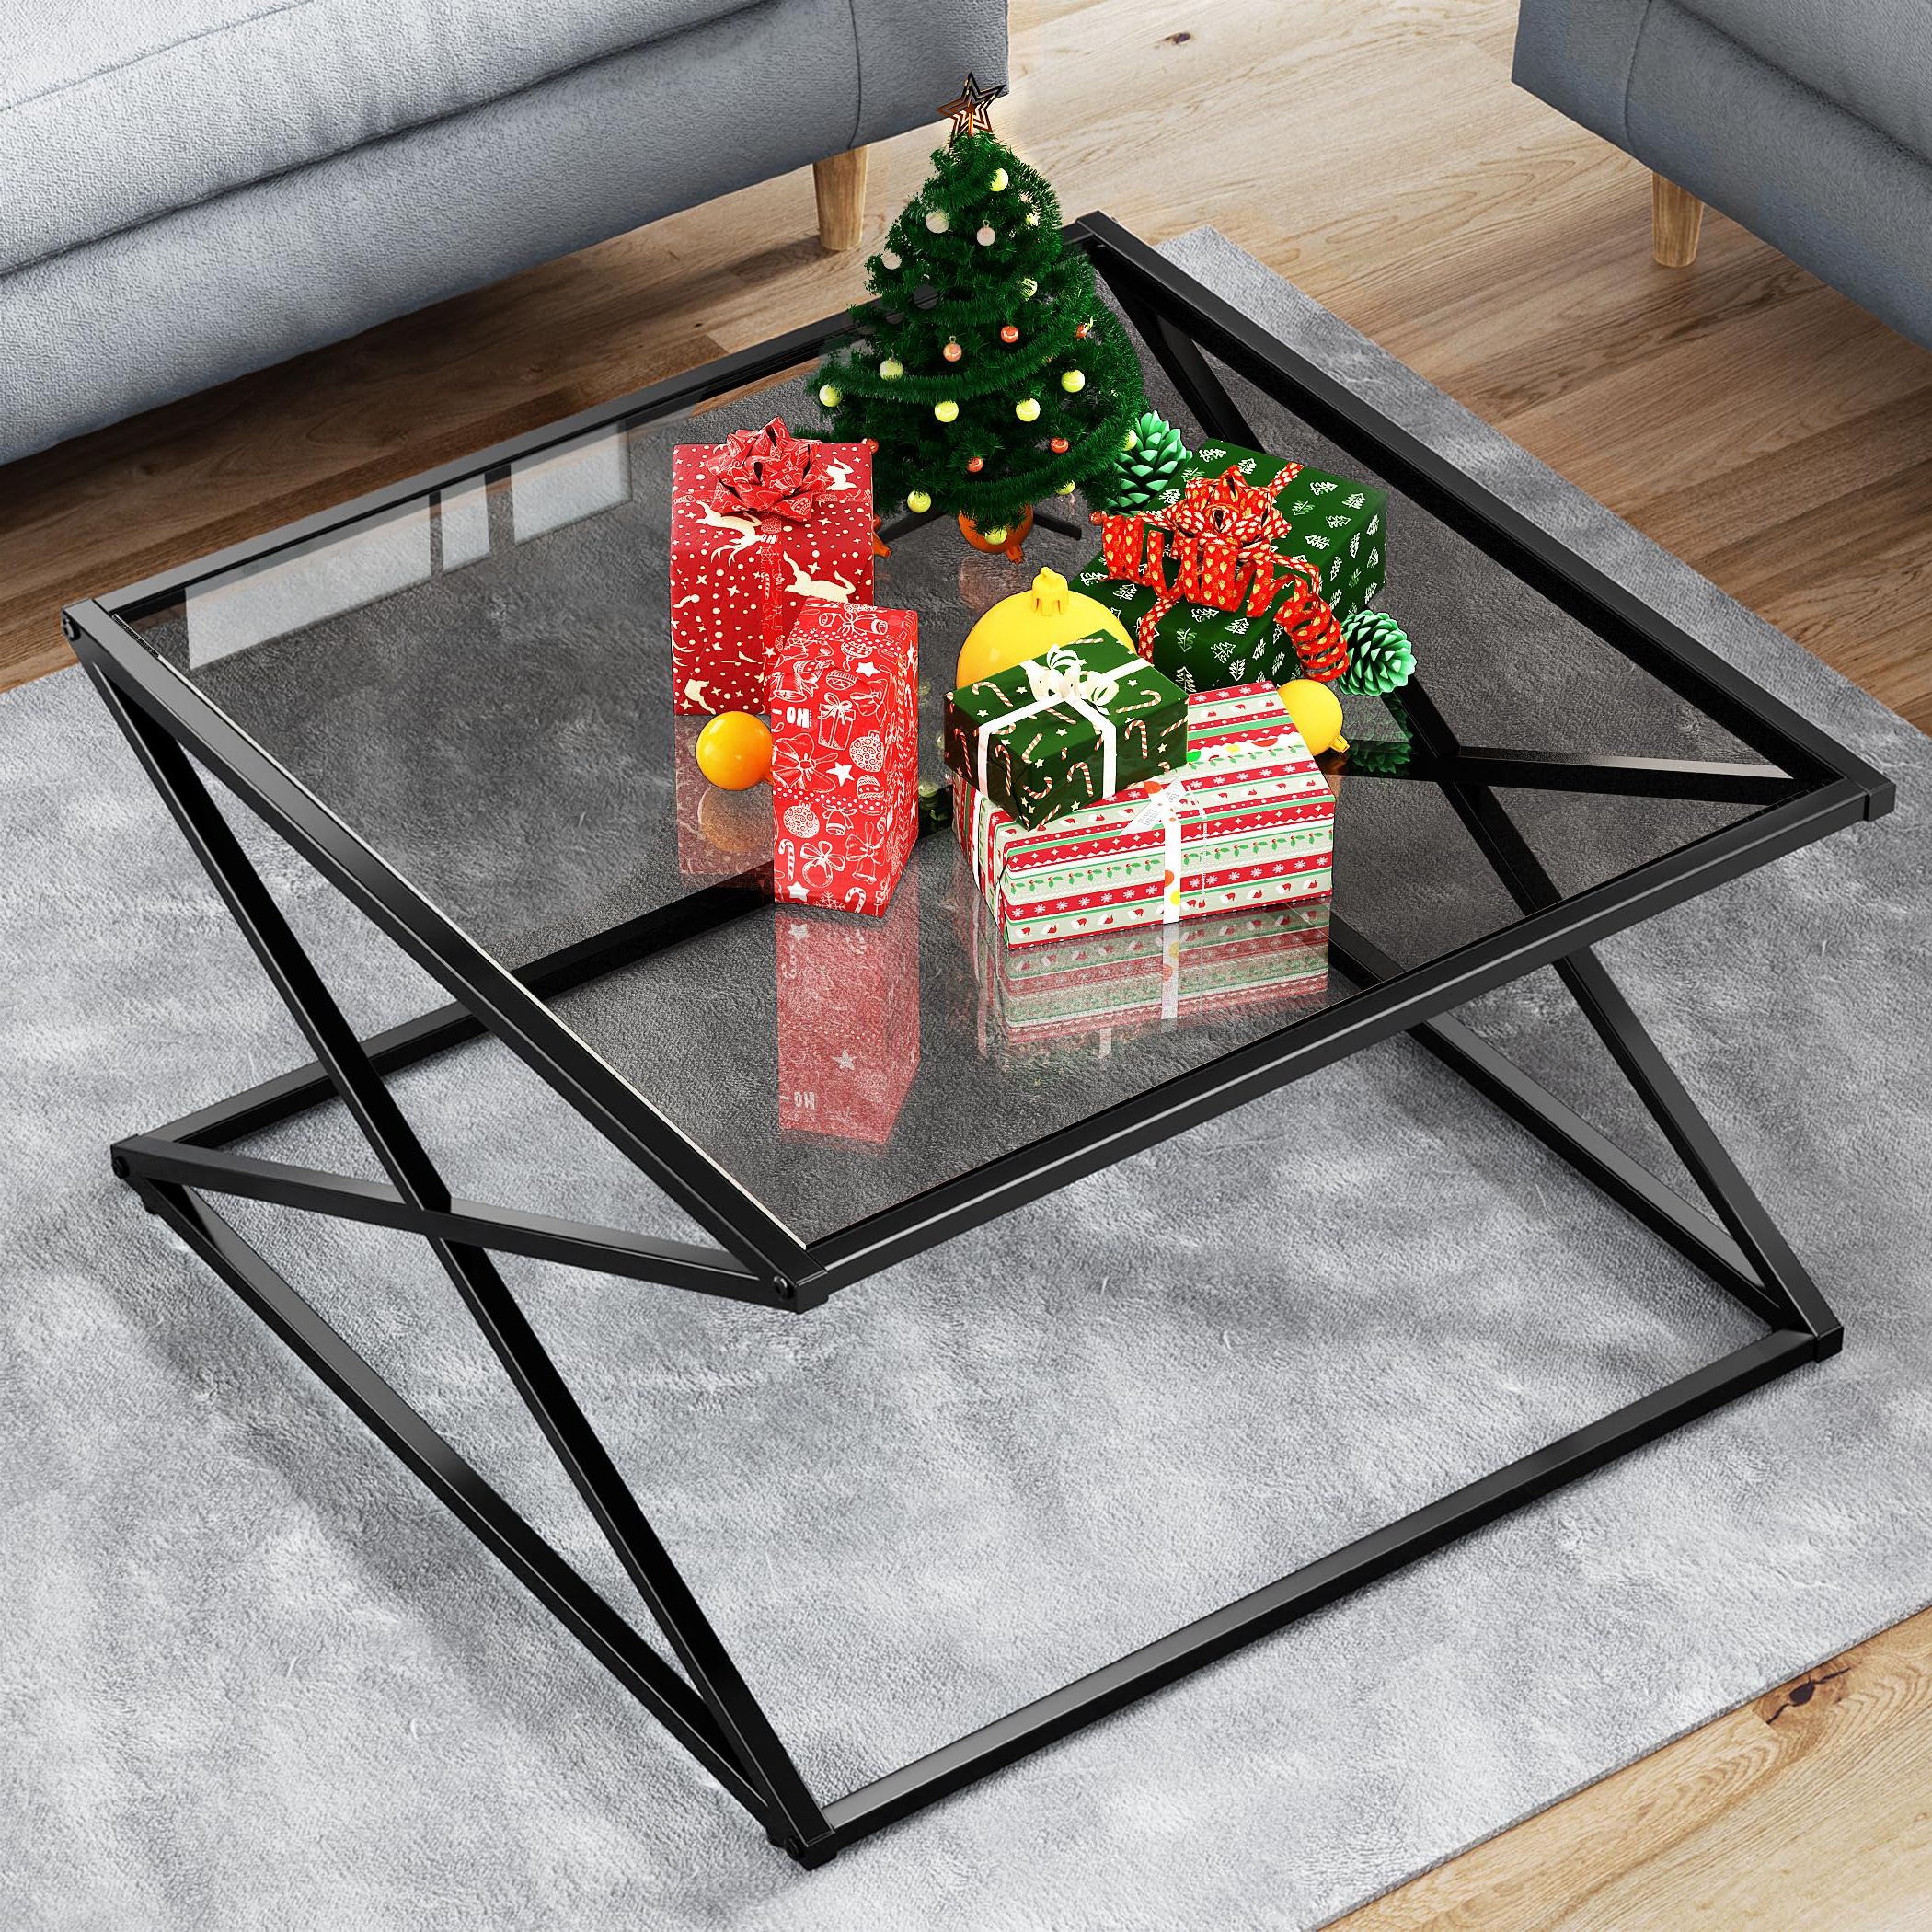 Latest Tempered Glass Coffee Tables Regarding Amazon: Glass Coffee Table, 27.6" Modern Small Coffee Table Center Table  Glass Top Clear Square Coffee Tables For Living Room Home Office,  Minimalist Design Easy Assembly, Tempered Glass – Gray Black : Home (Photo 5 of 10)